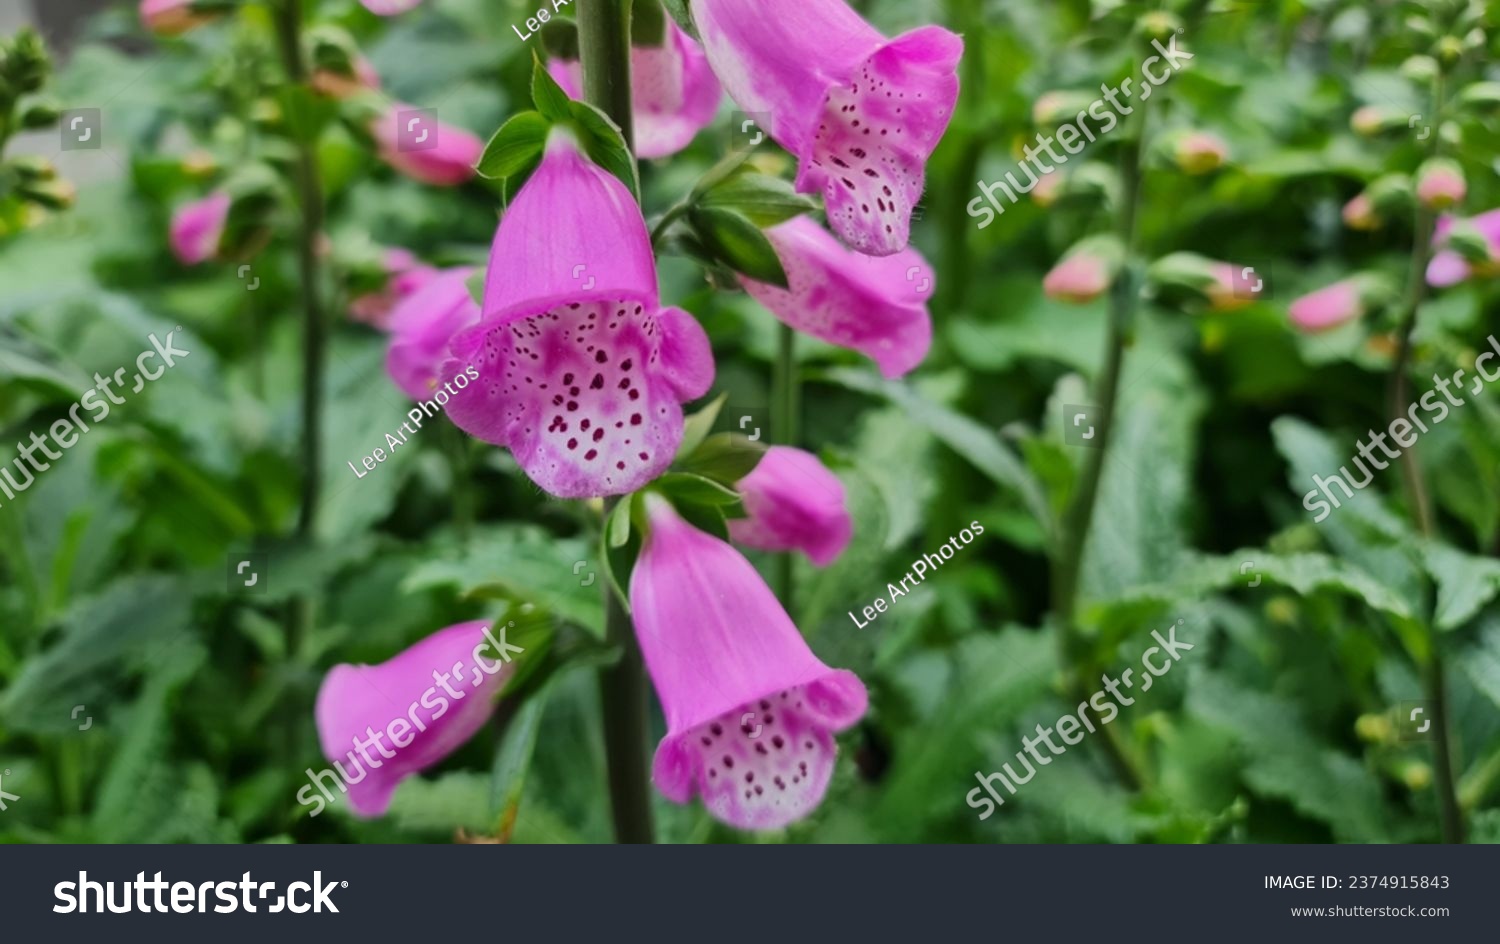 Close-up of Digitalis Pink Panther flowers. #2374915843